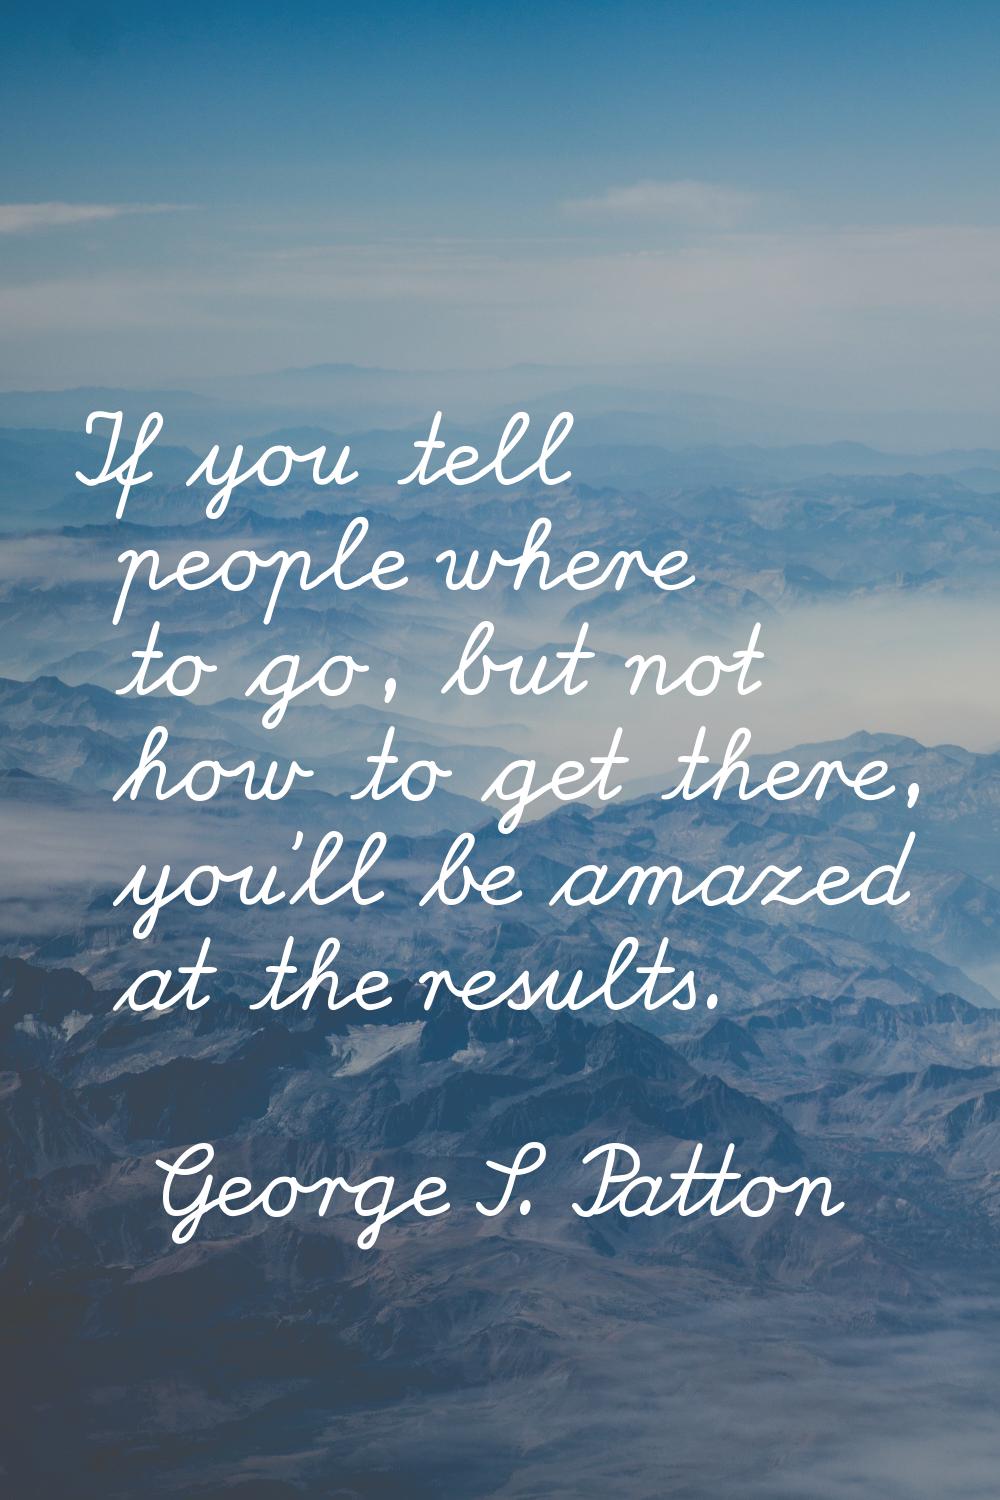 If you tell people where to go, but not how to get there, you'll be amazed at the results.